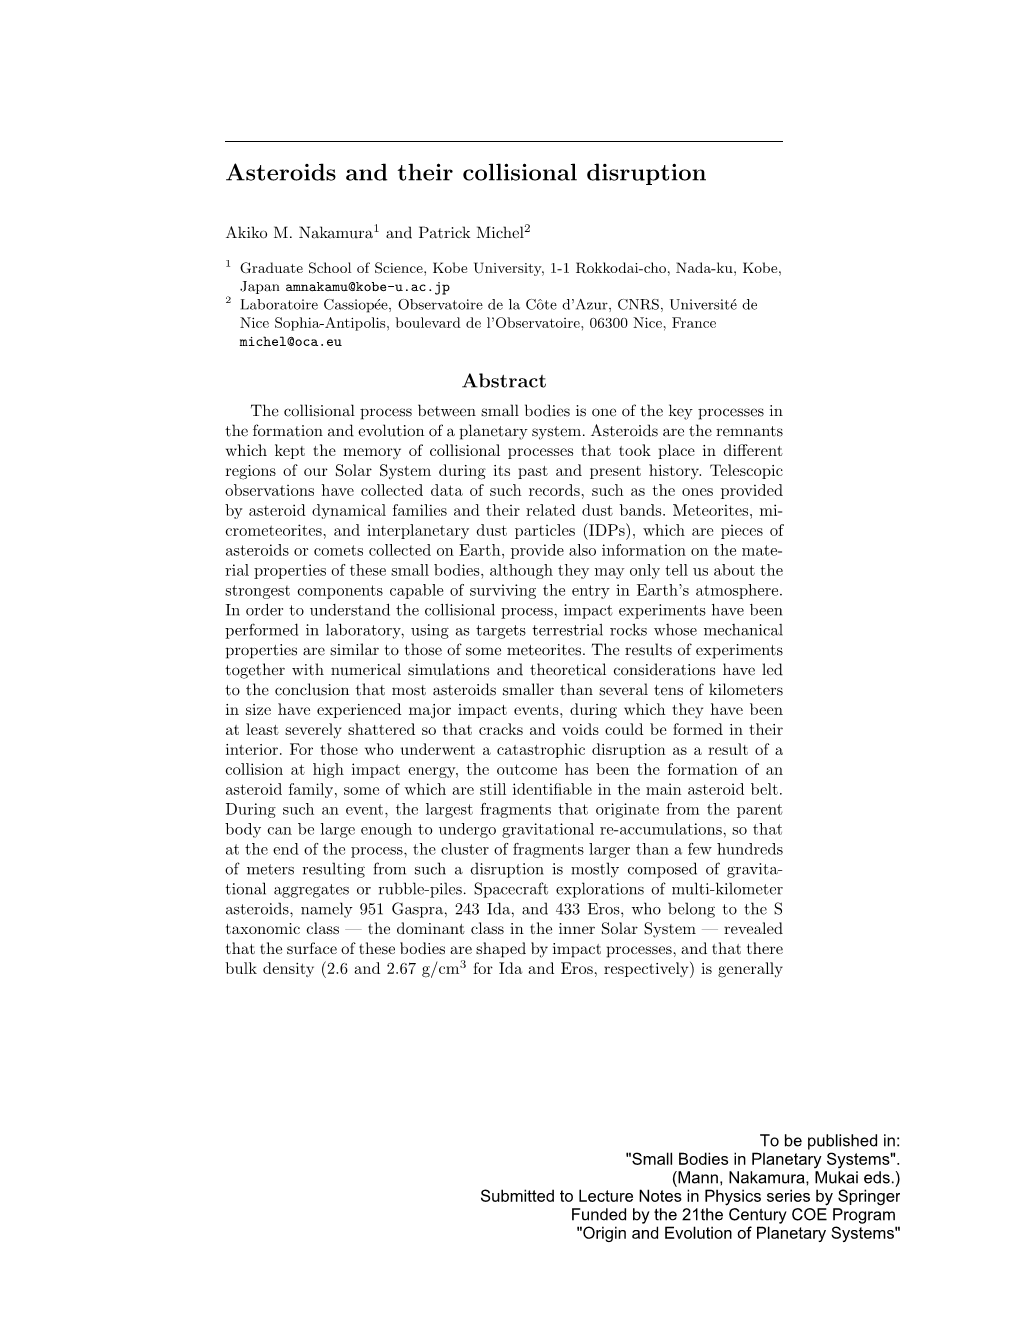 Asteroids and Their Collisional Disruption